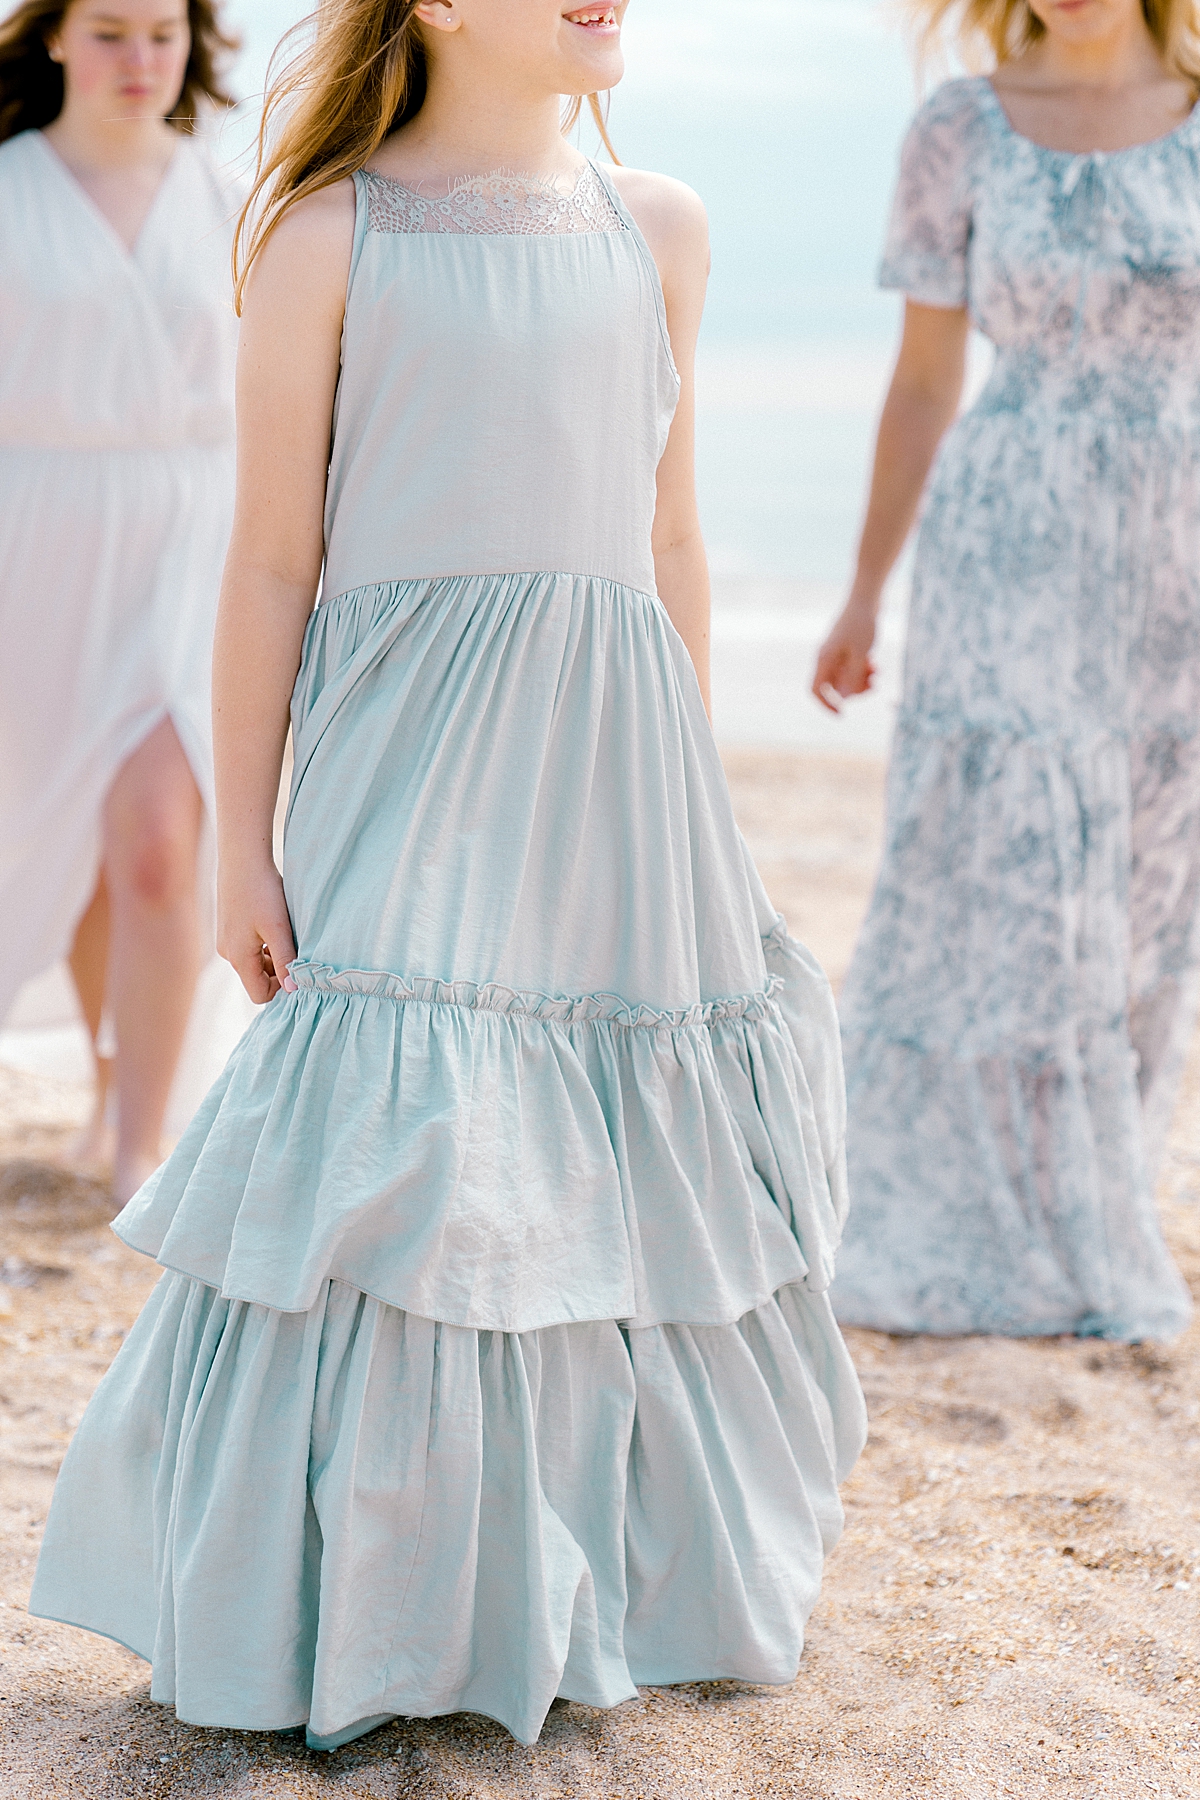 A young girl walks at the beach by the ocean in a pretty blue ruffled long dress.